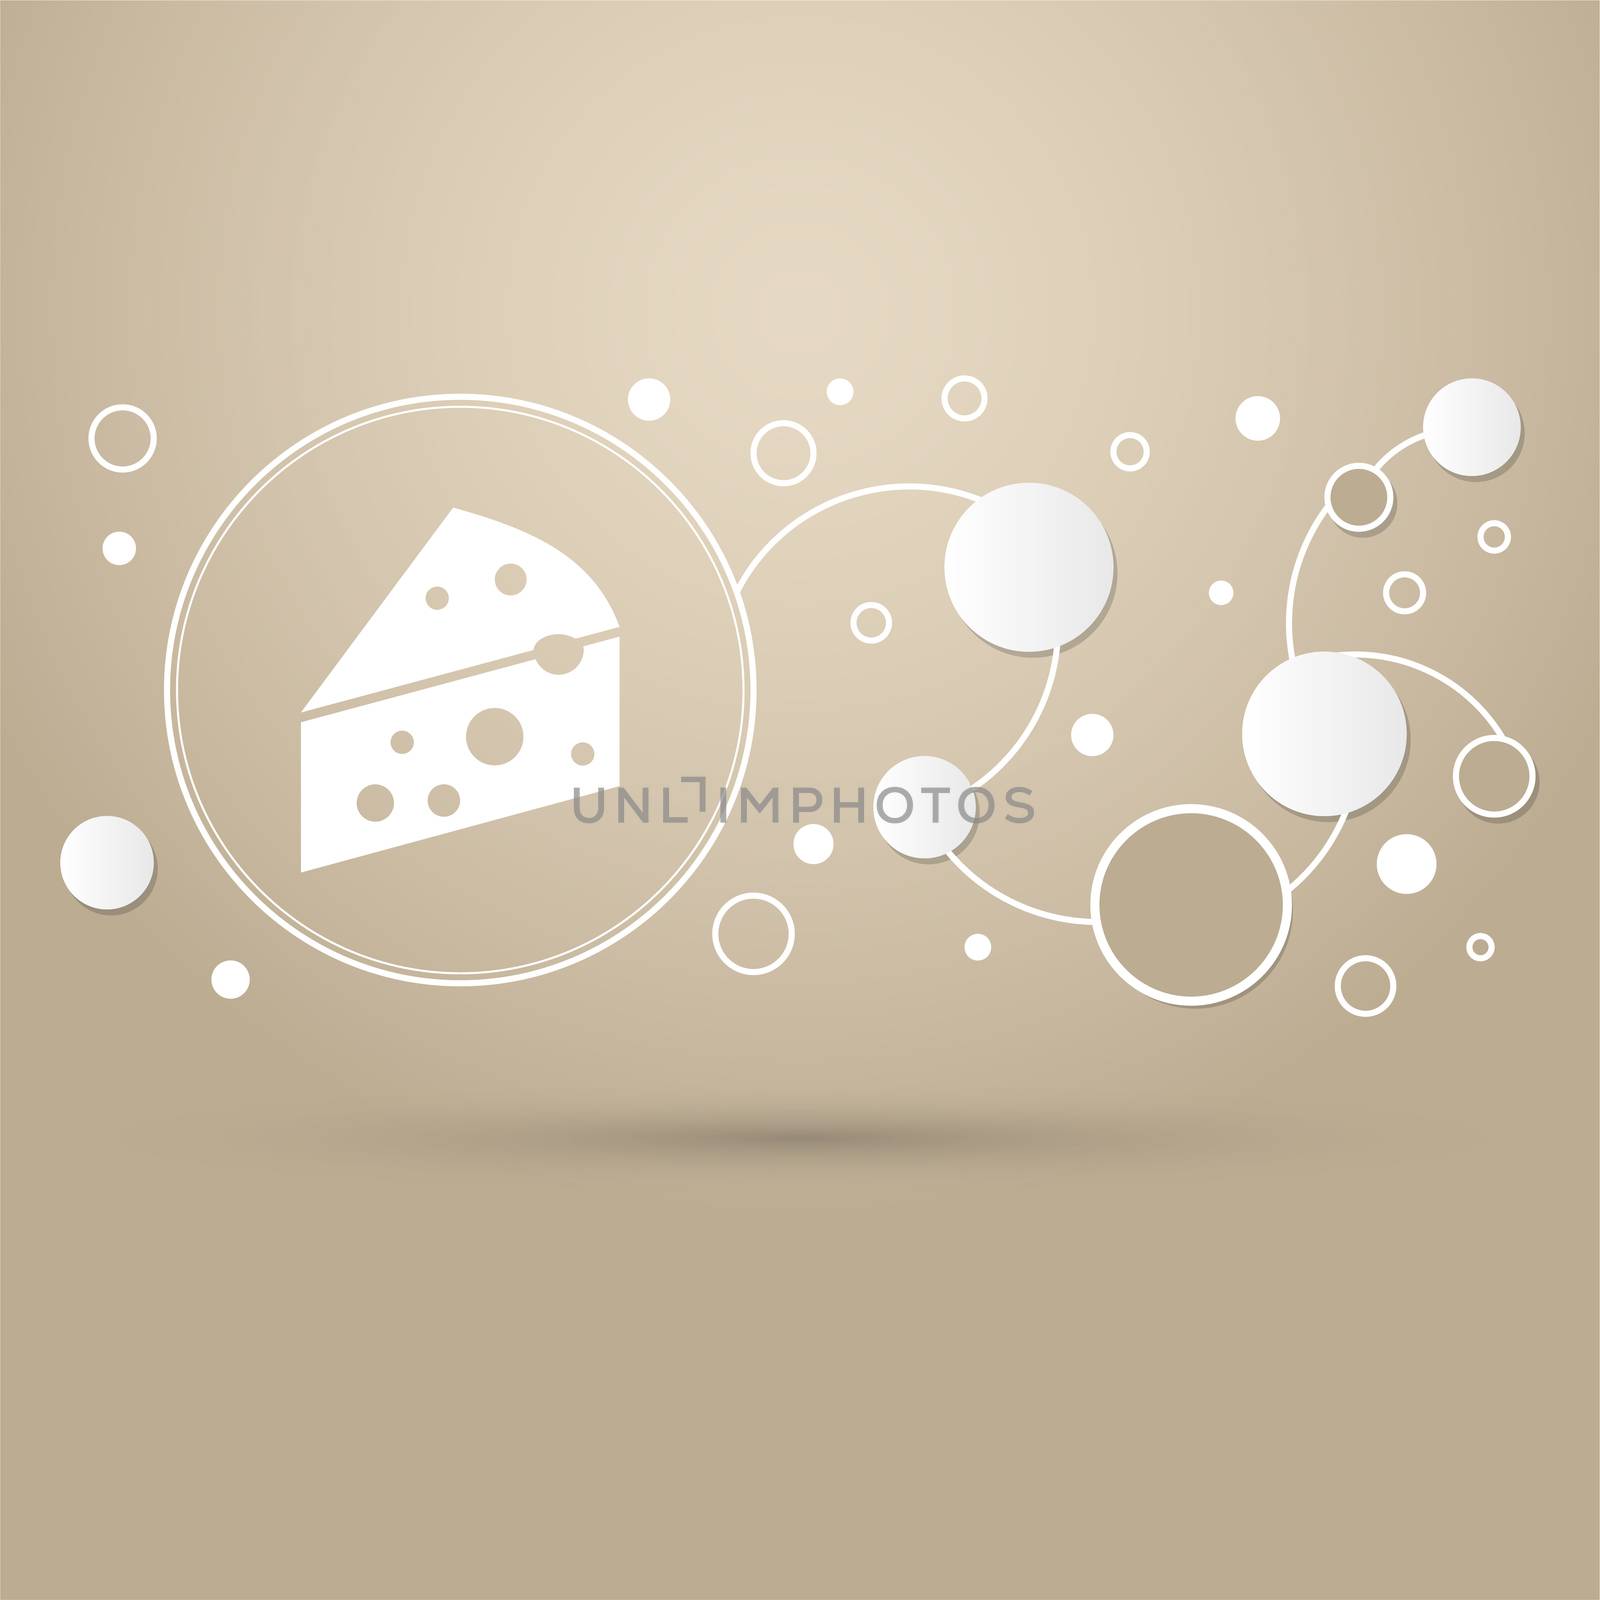 Cheese icon on a brown background with elegant style and modern design infographic.  by Adamchuk